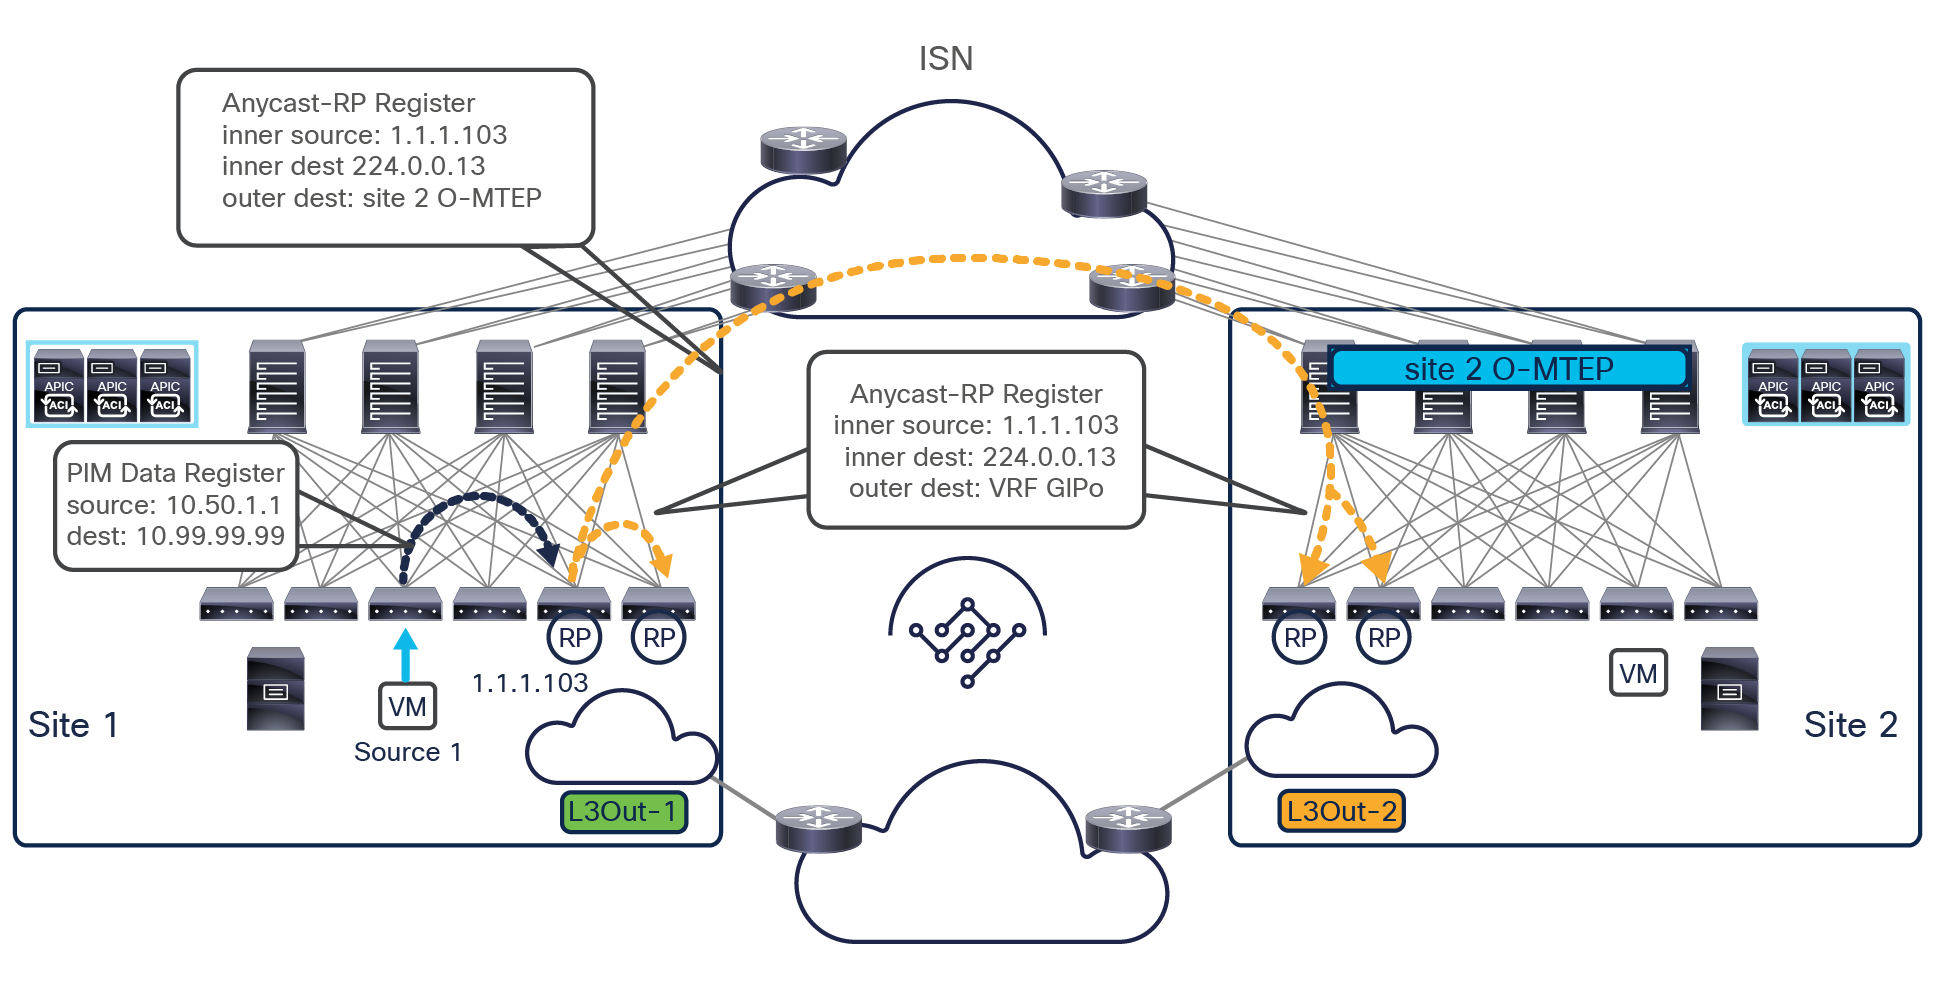 Separate network infrastructures for IPN and ISN connectivity